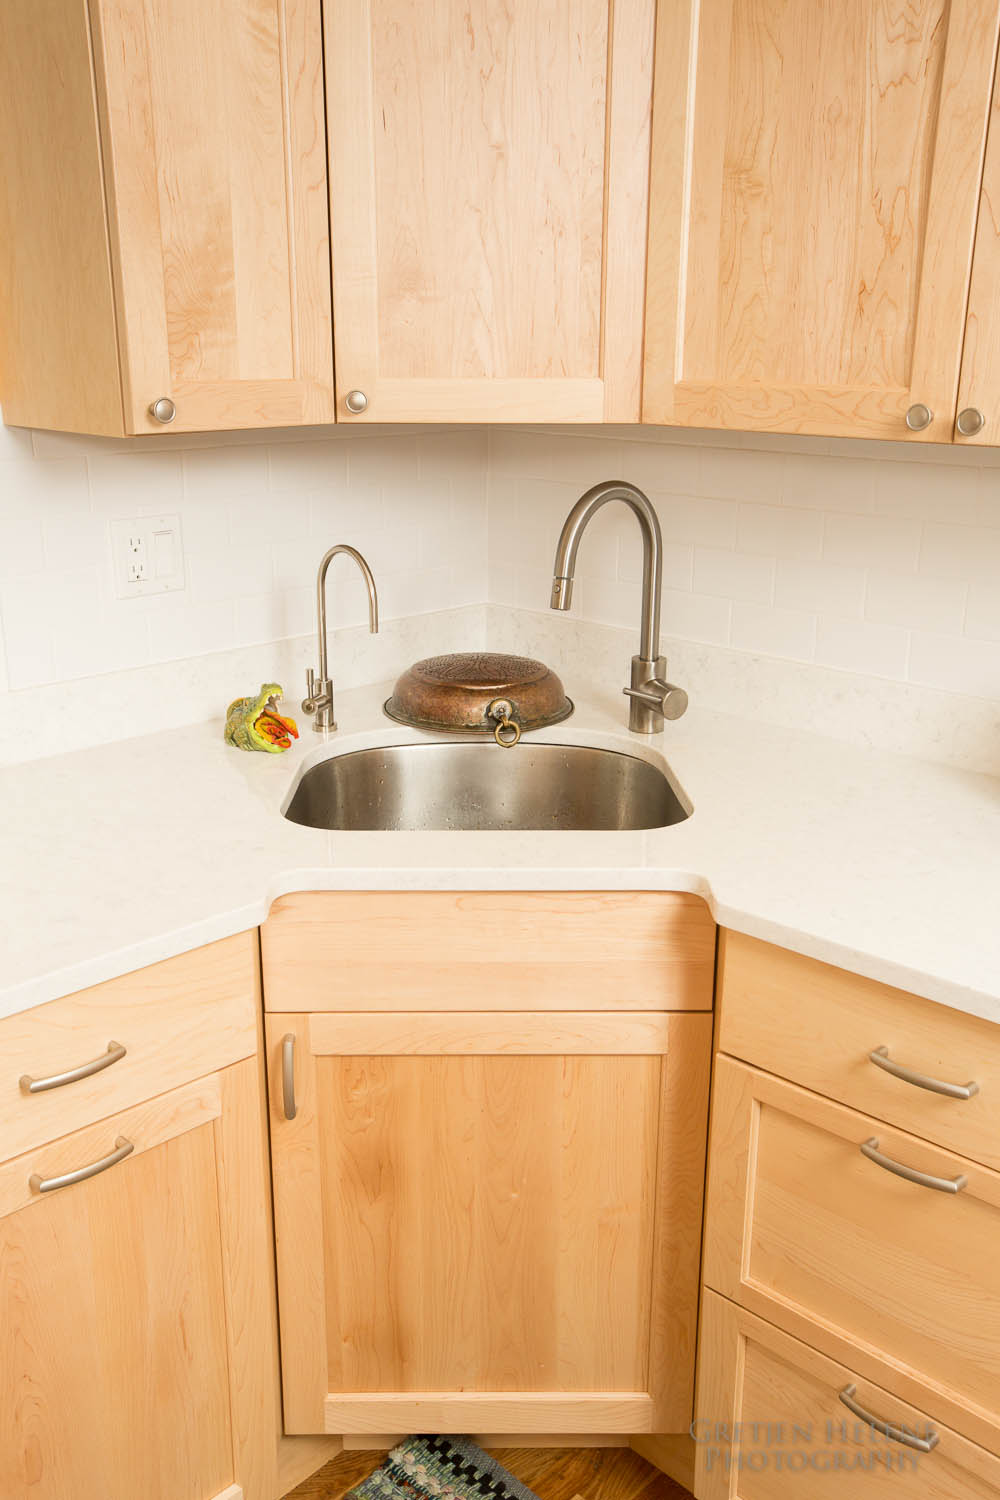 Quartz counter material with an undermount sink